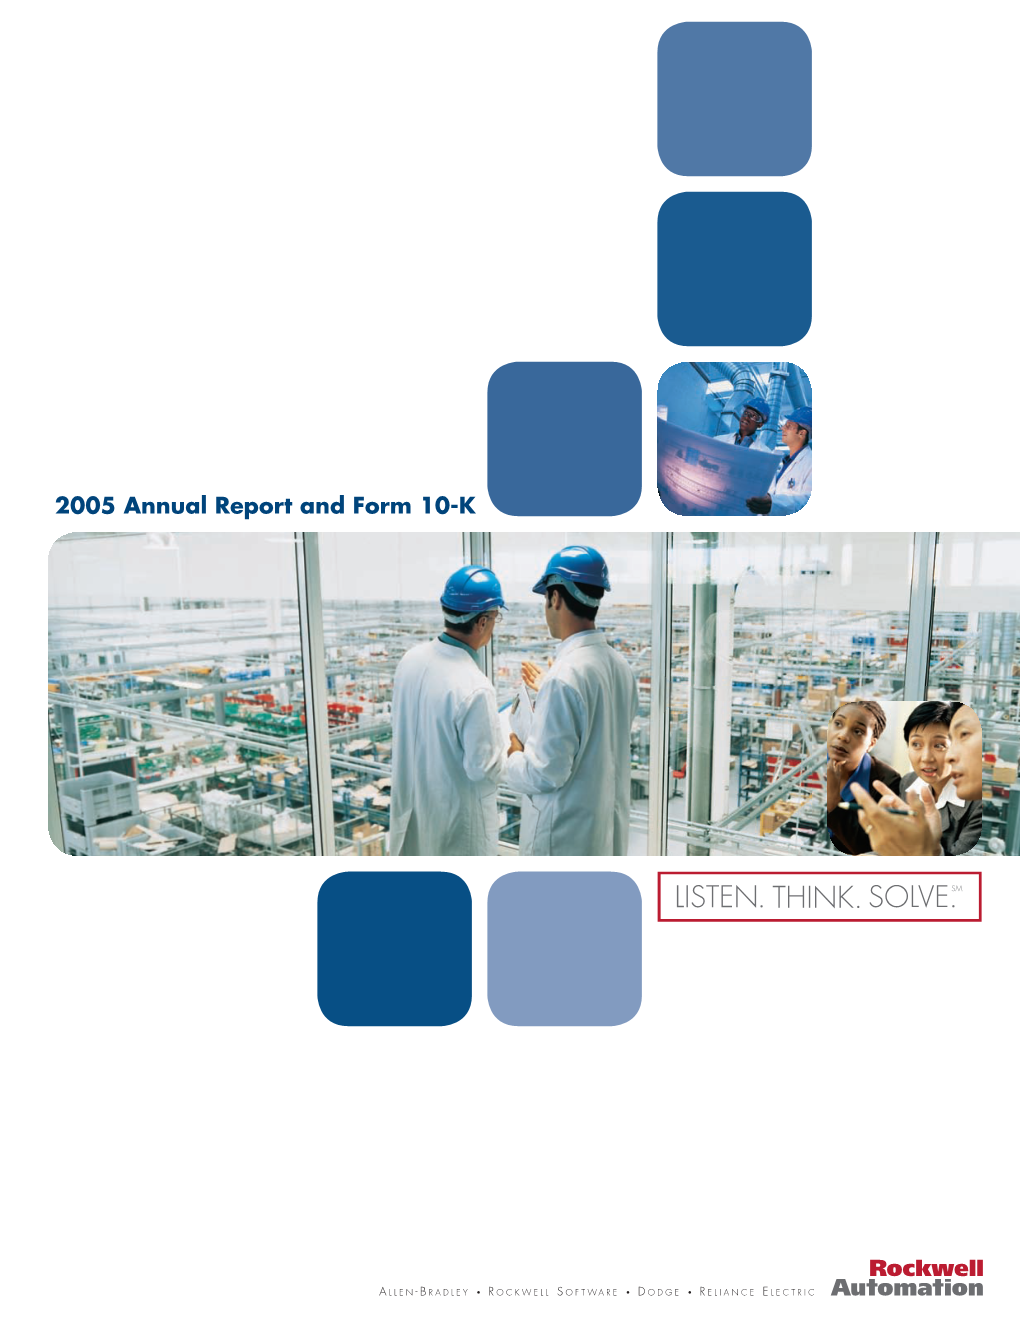 Rockwell Automation 2005 Annual Report and Form 10-K